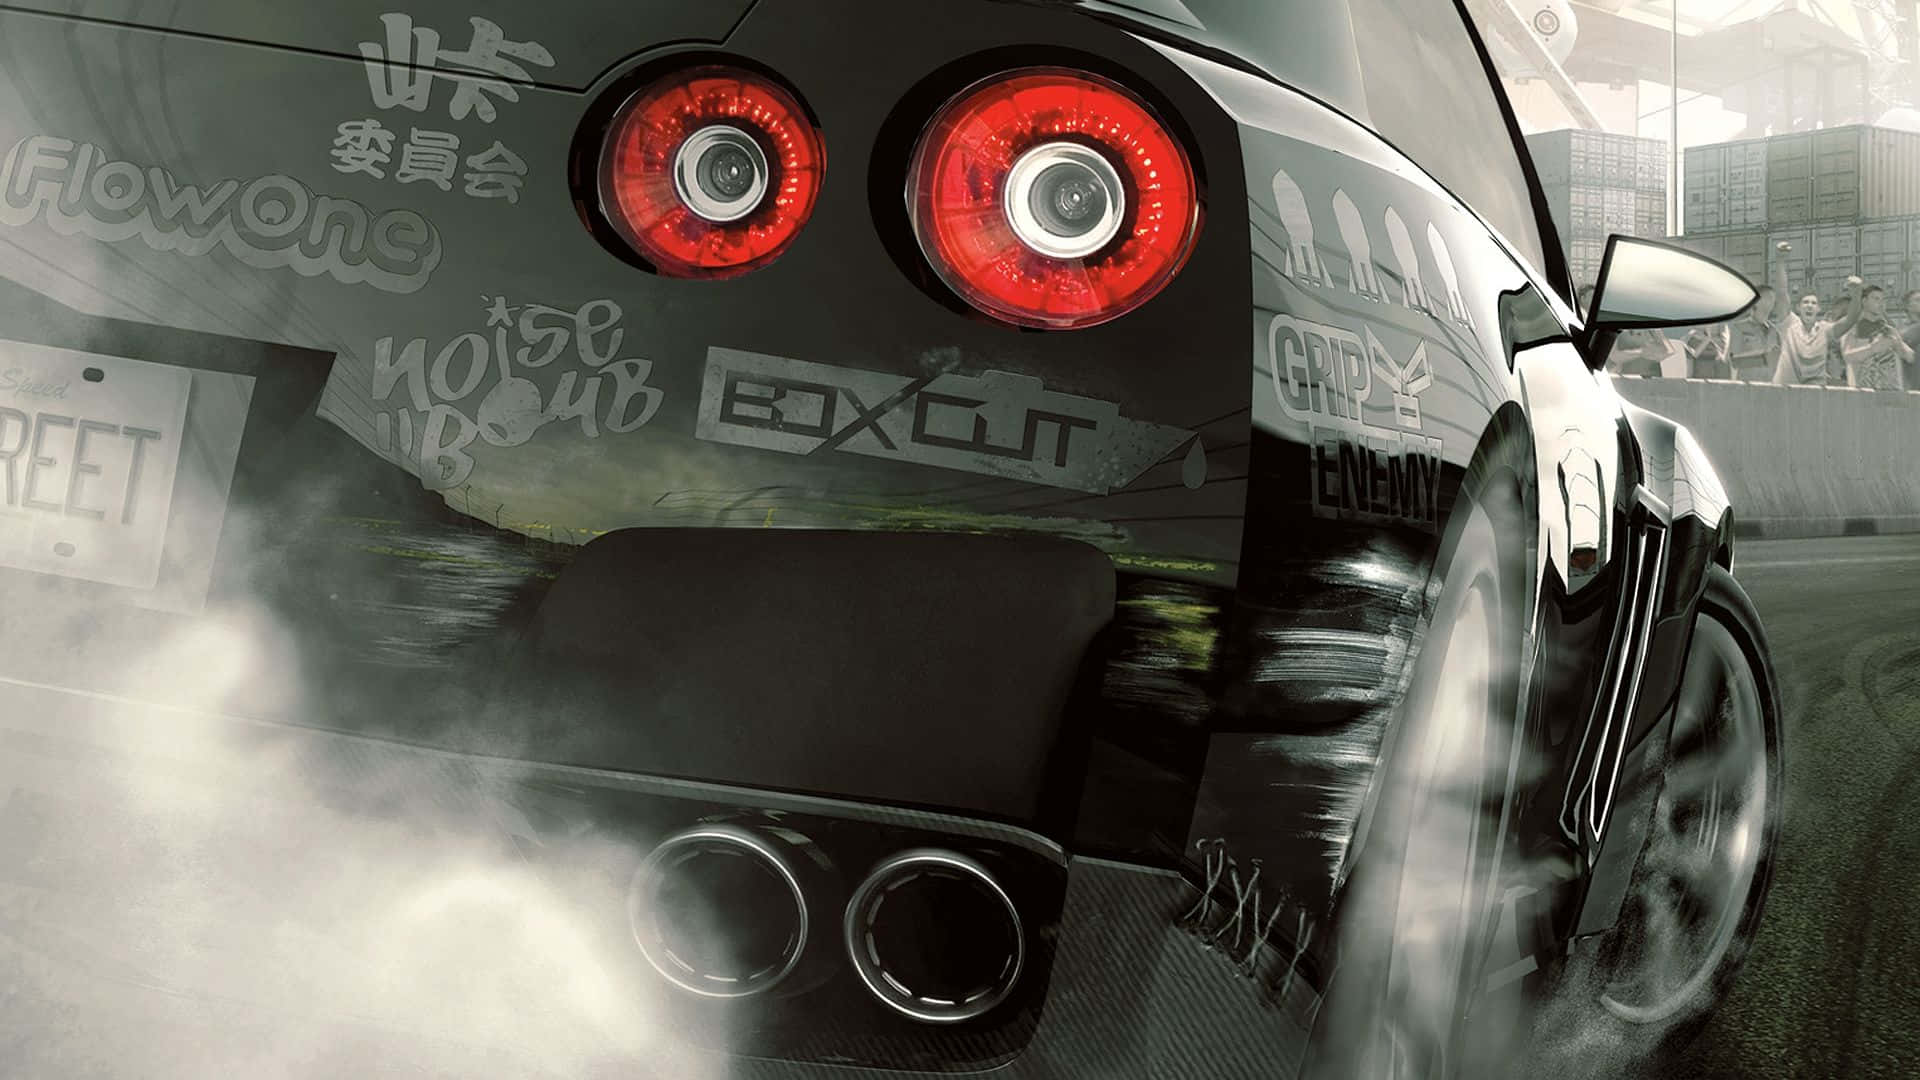 Ash's Need For Speed Laptop is Ready For Race Day! Wallpaper